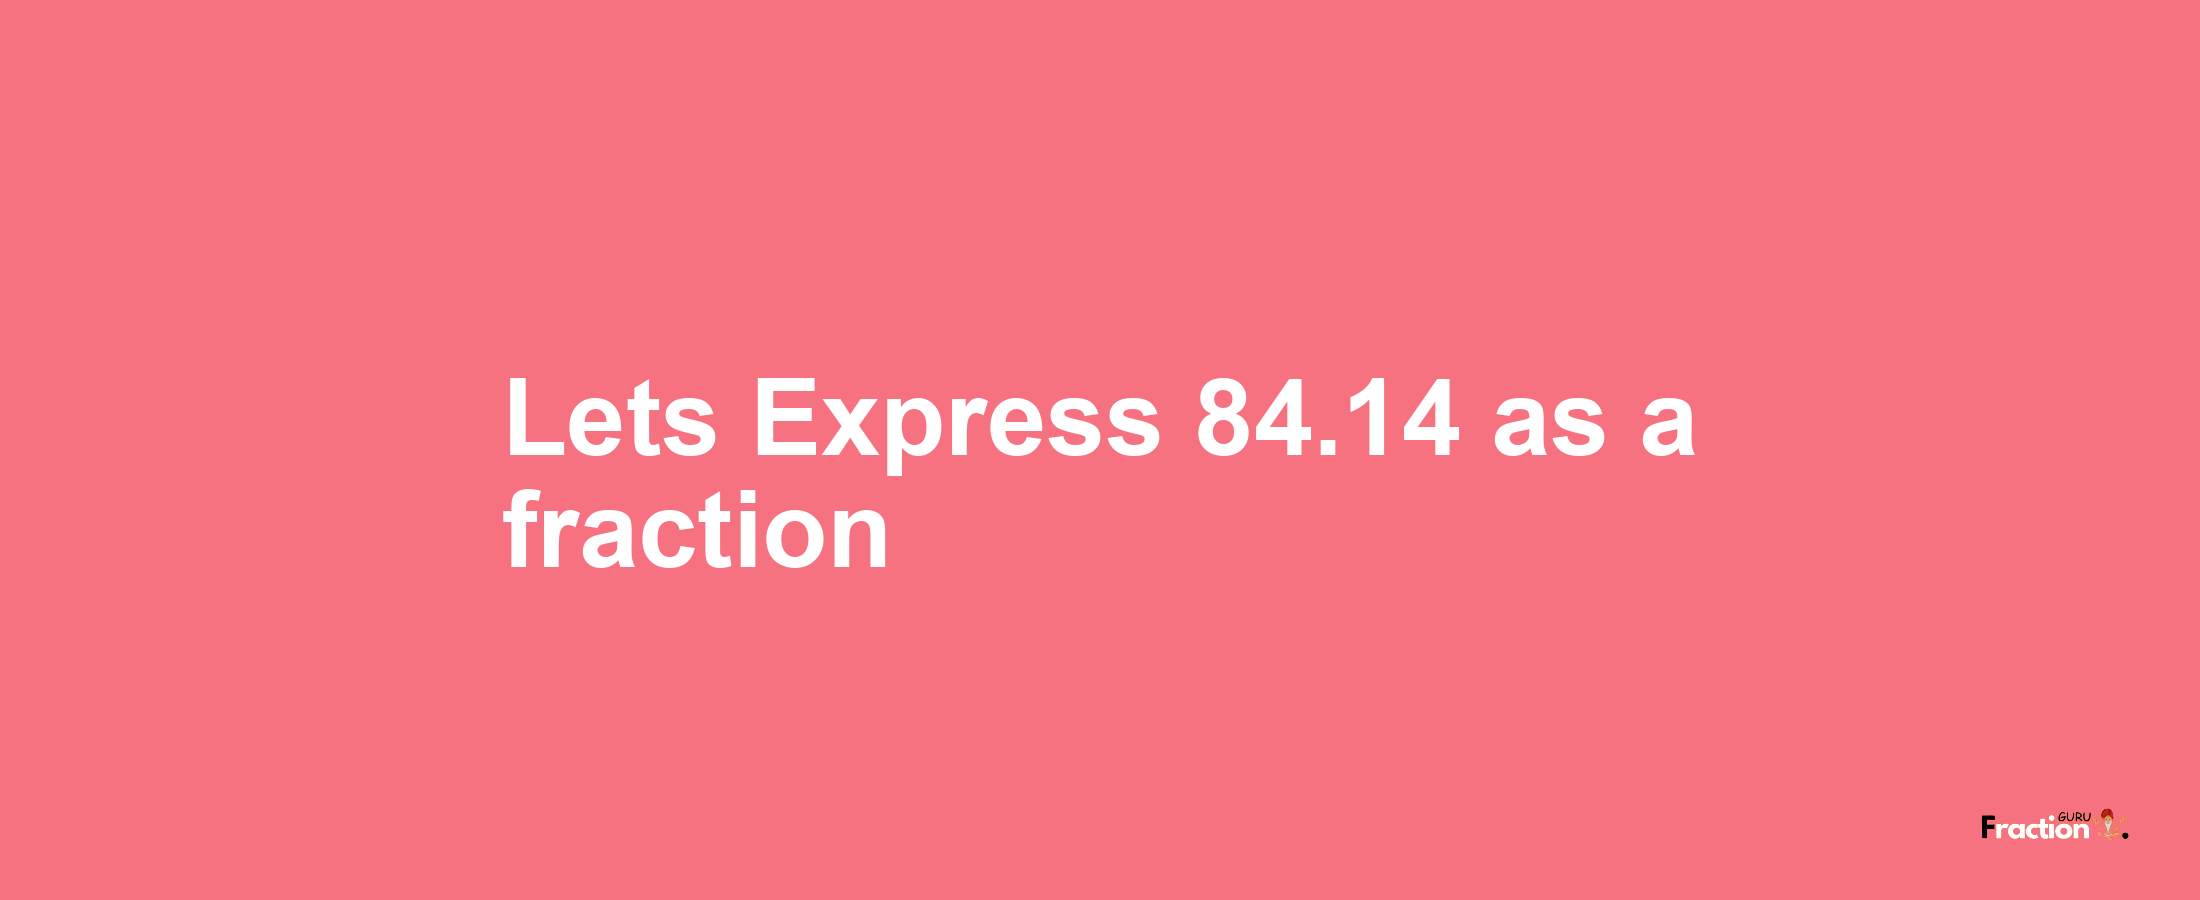 Lets Express 84.14 as afraction